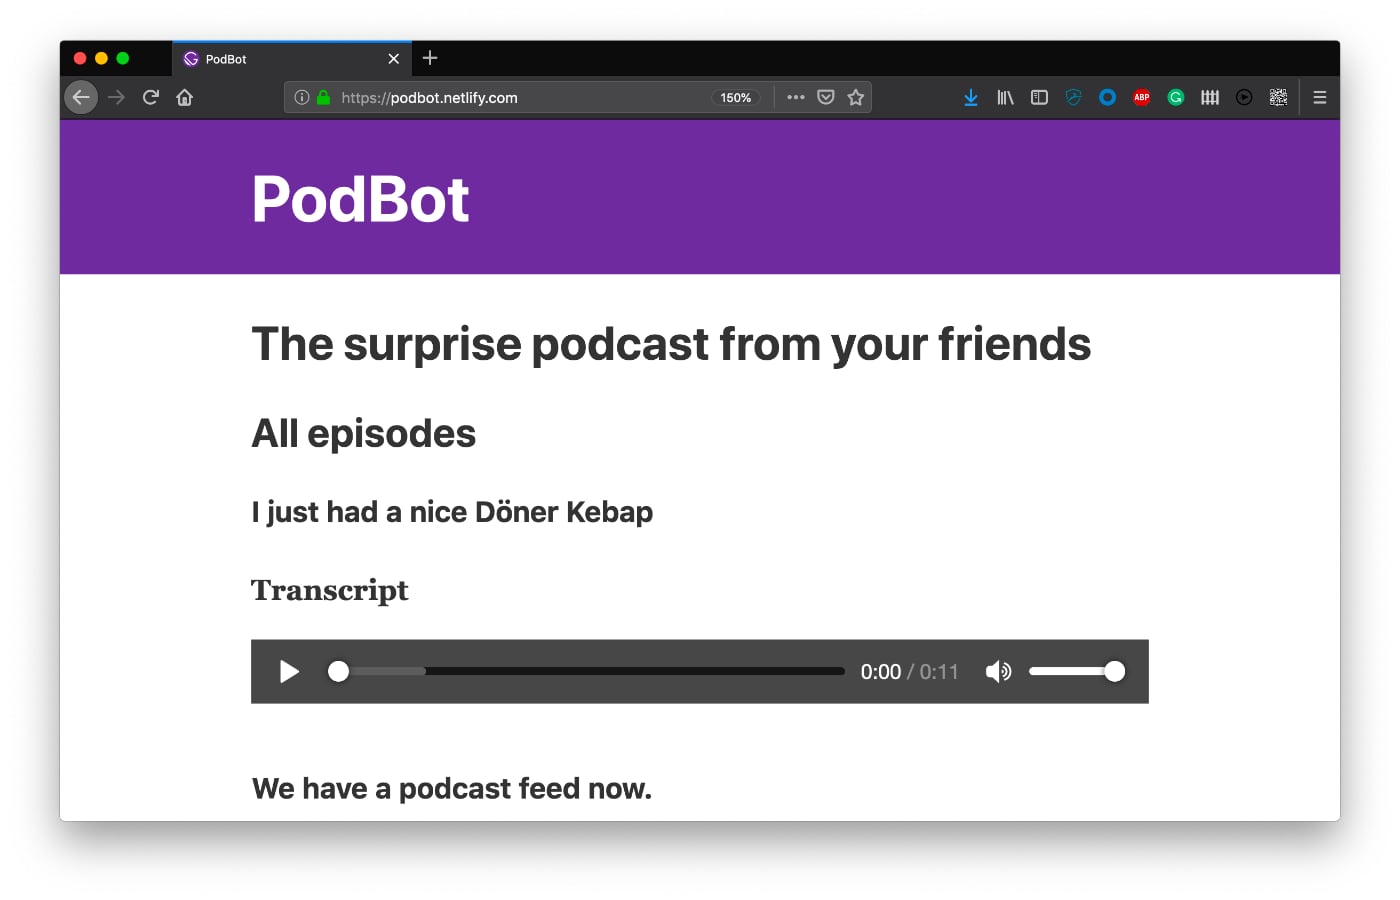 Podbot preview in a browser window